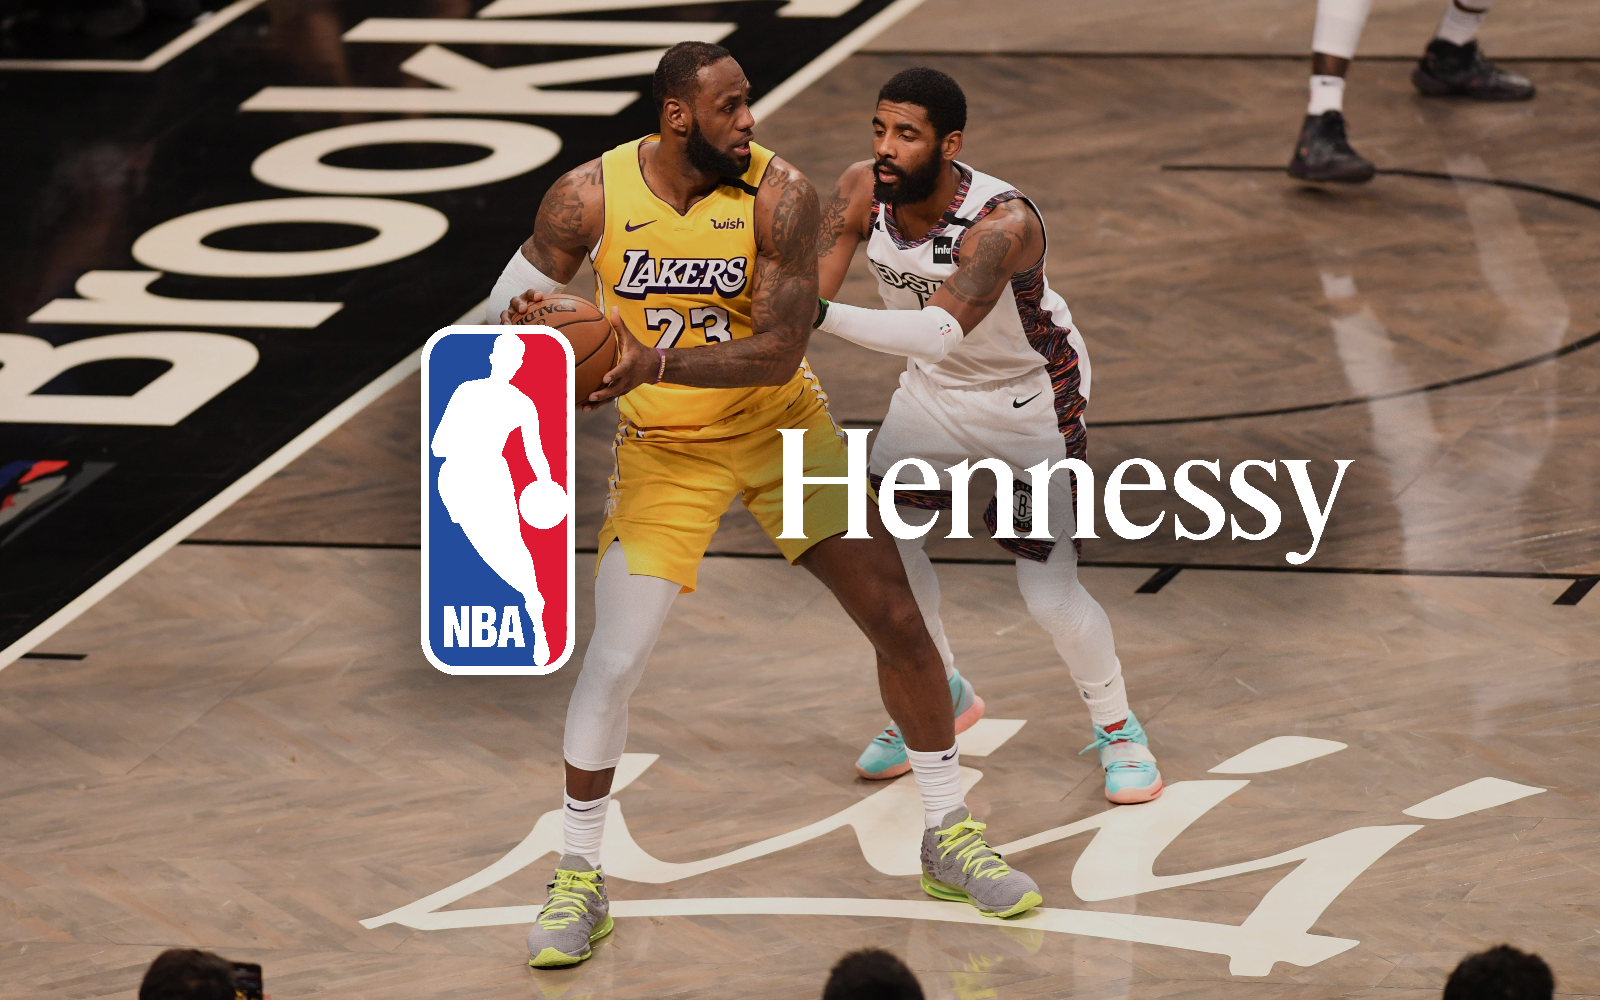 Hennessy and the NBA team up for global partnership - LVMH